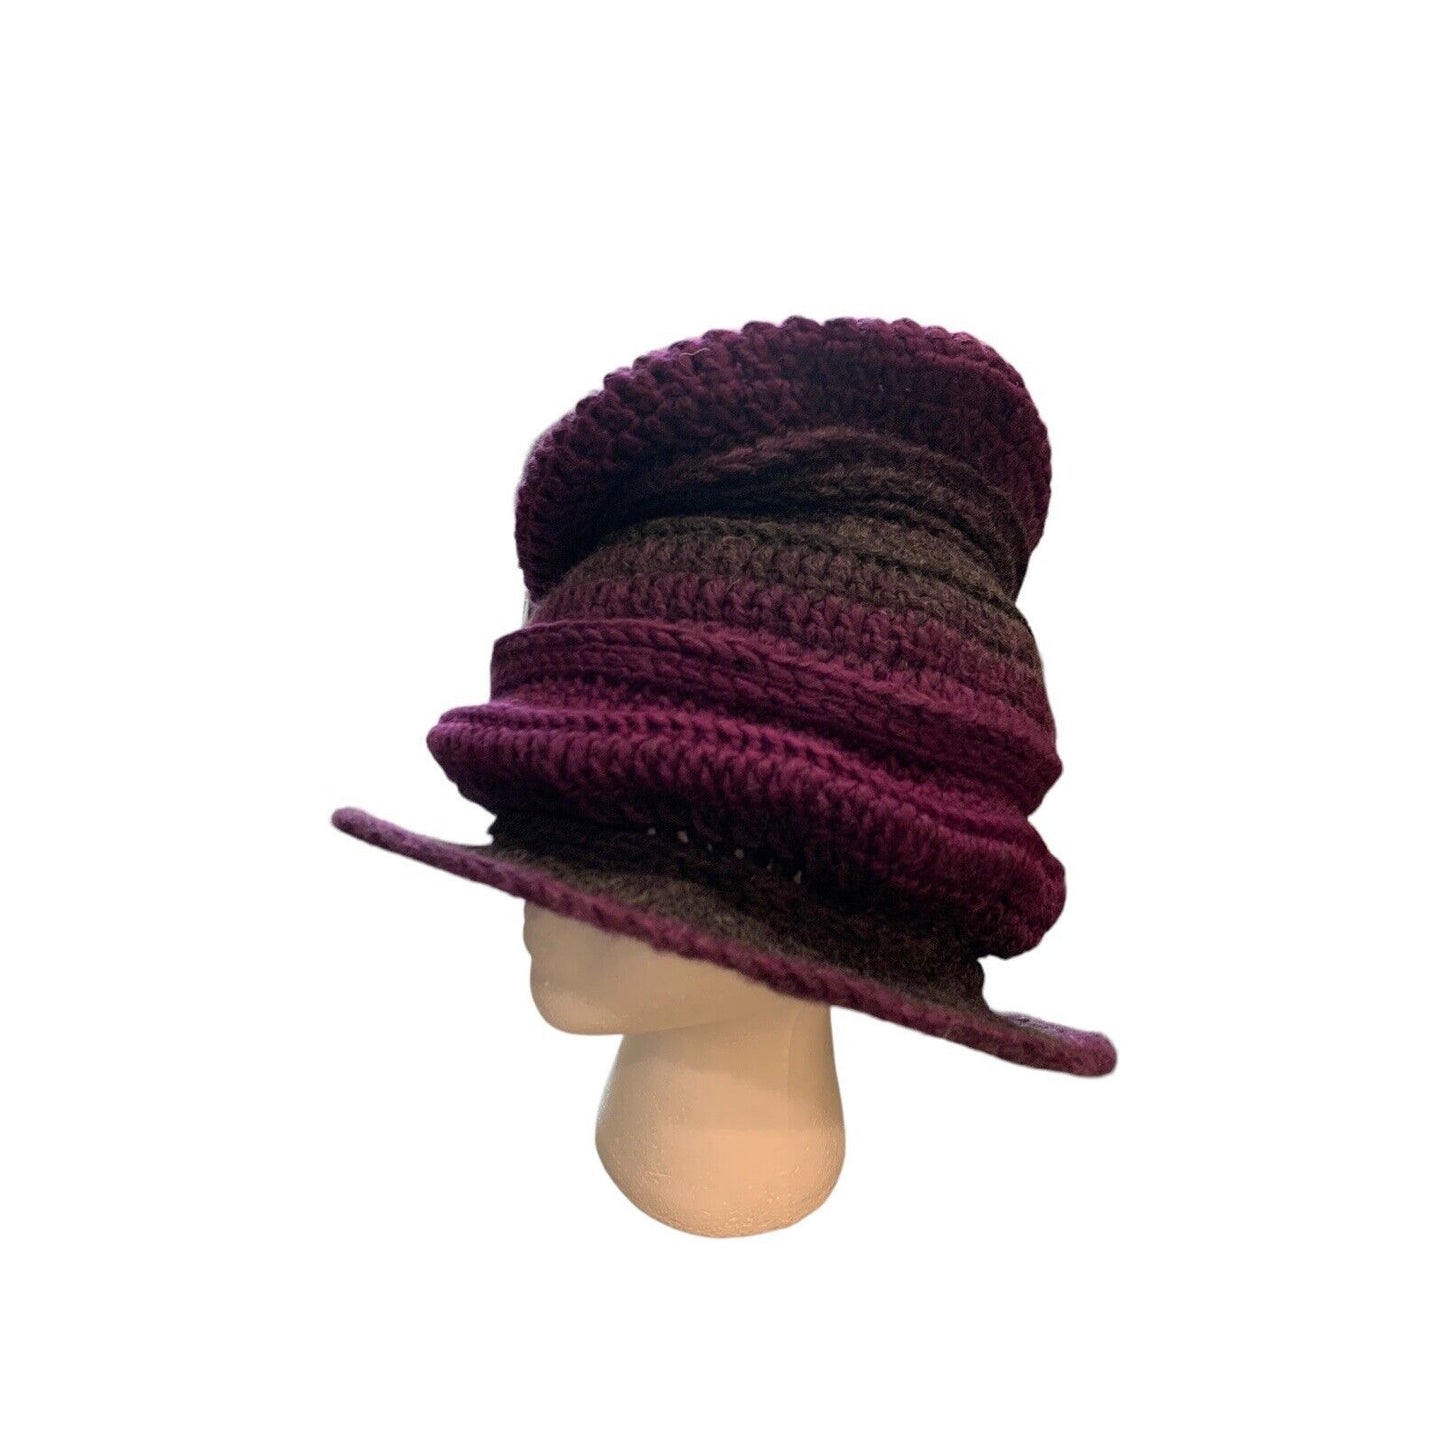 Yarn Gone Wild - Yarn Craft Crochet Hat From the “The Higher The Hat” Collection